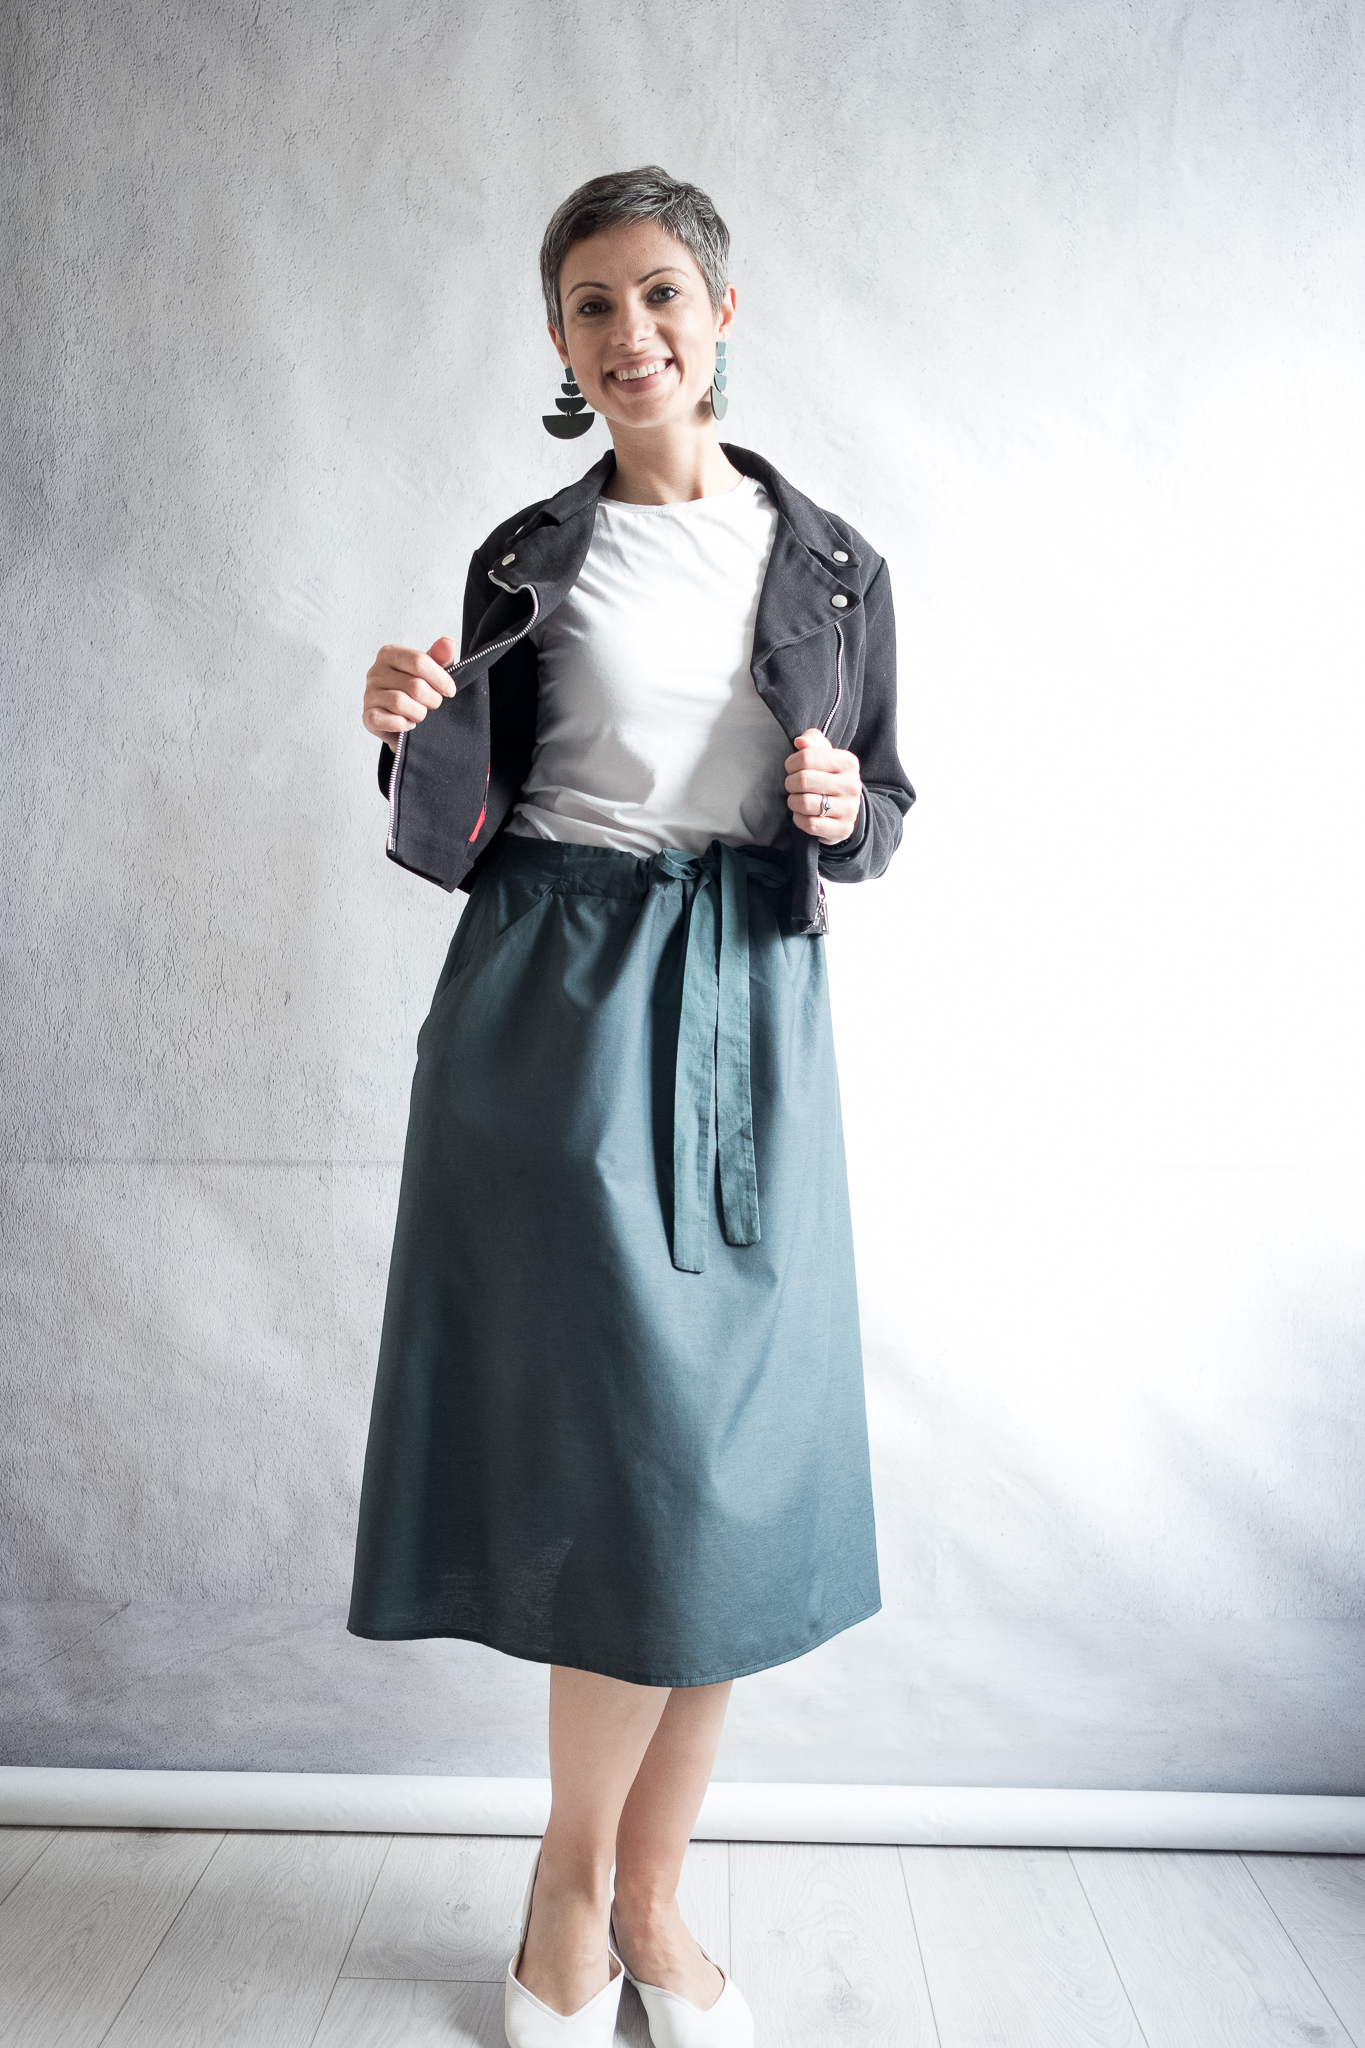 Outfit details: black denim cropped biker jacket, white fitted t-shirt, green A-line skirt with ties; white leather flats; polymer clay earrings.

Skirt made with Fibre Mood Jutta sewing pattern